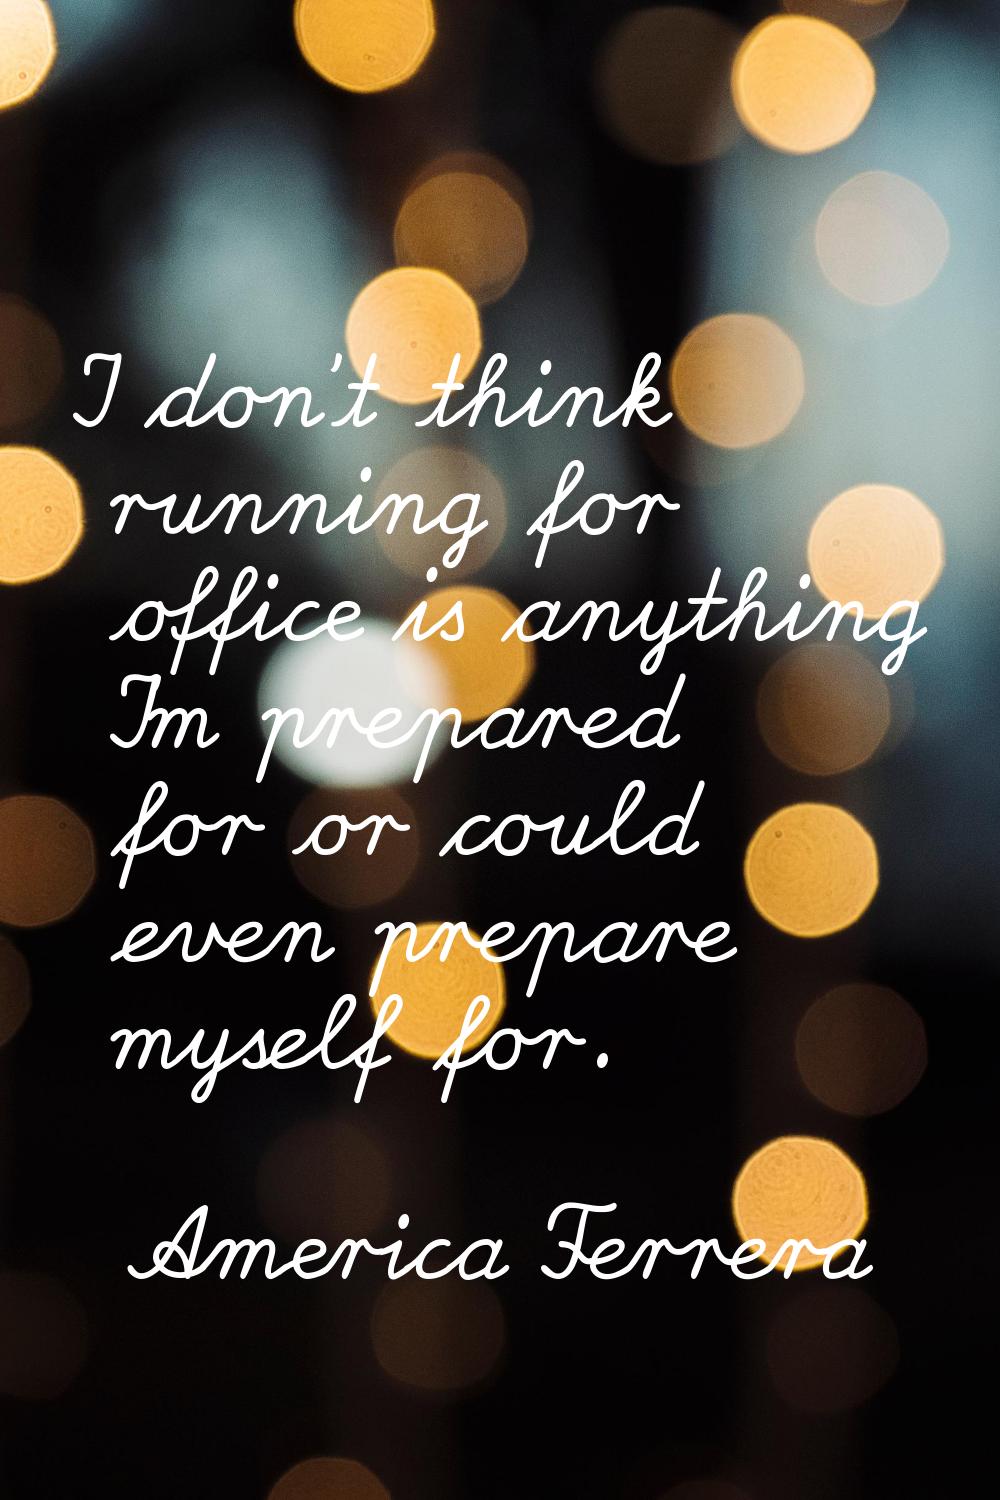 I don't think running for office is anything I'm prepared for or could even prepare myself for.